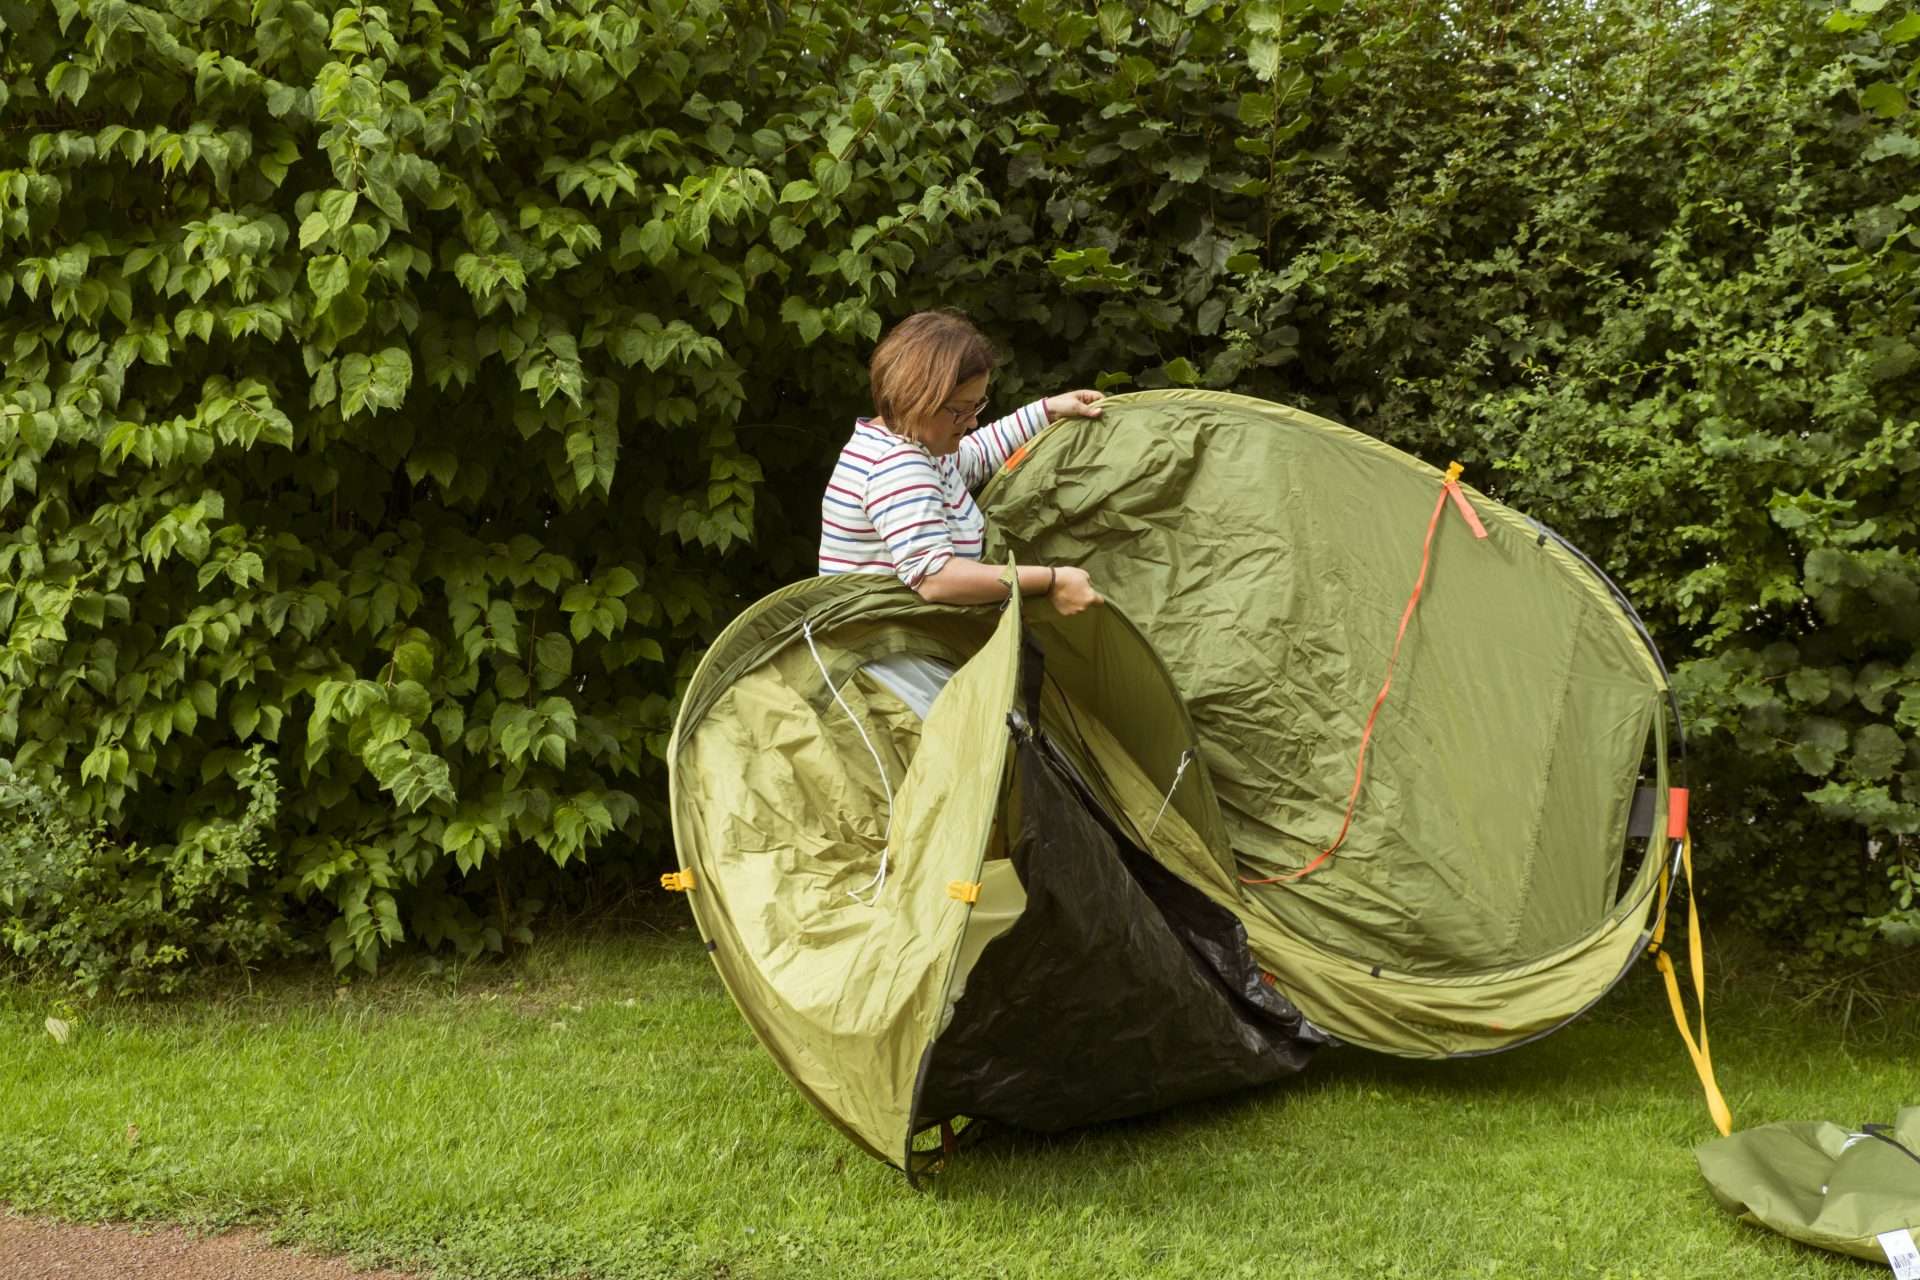 Woman opening green pop-up tent